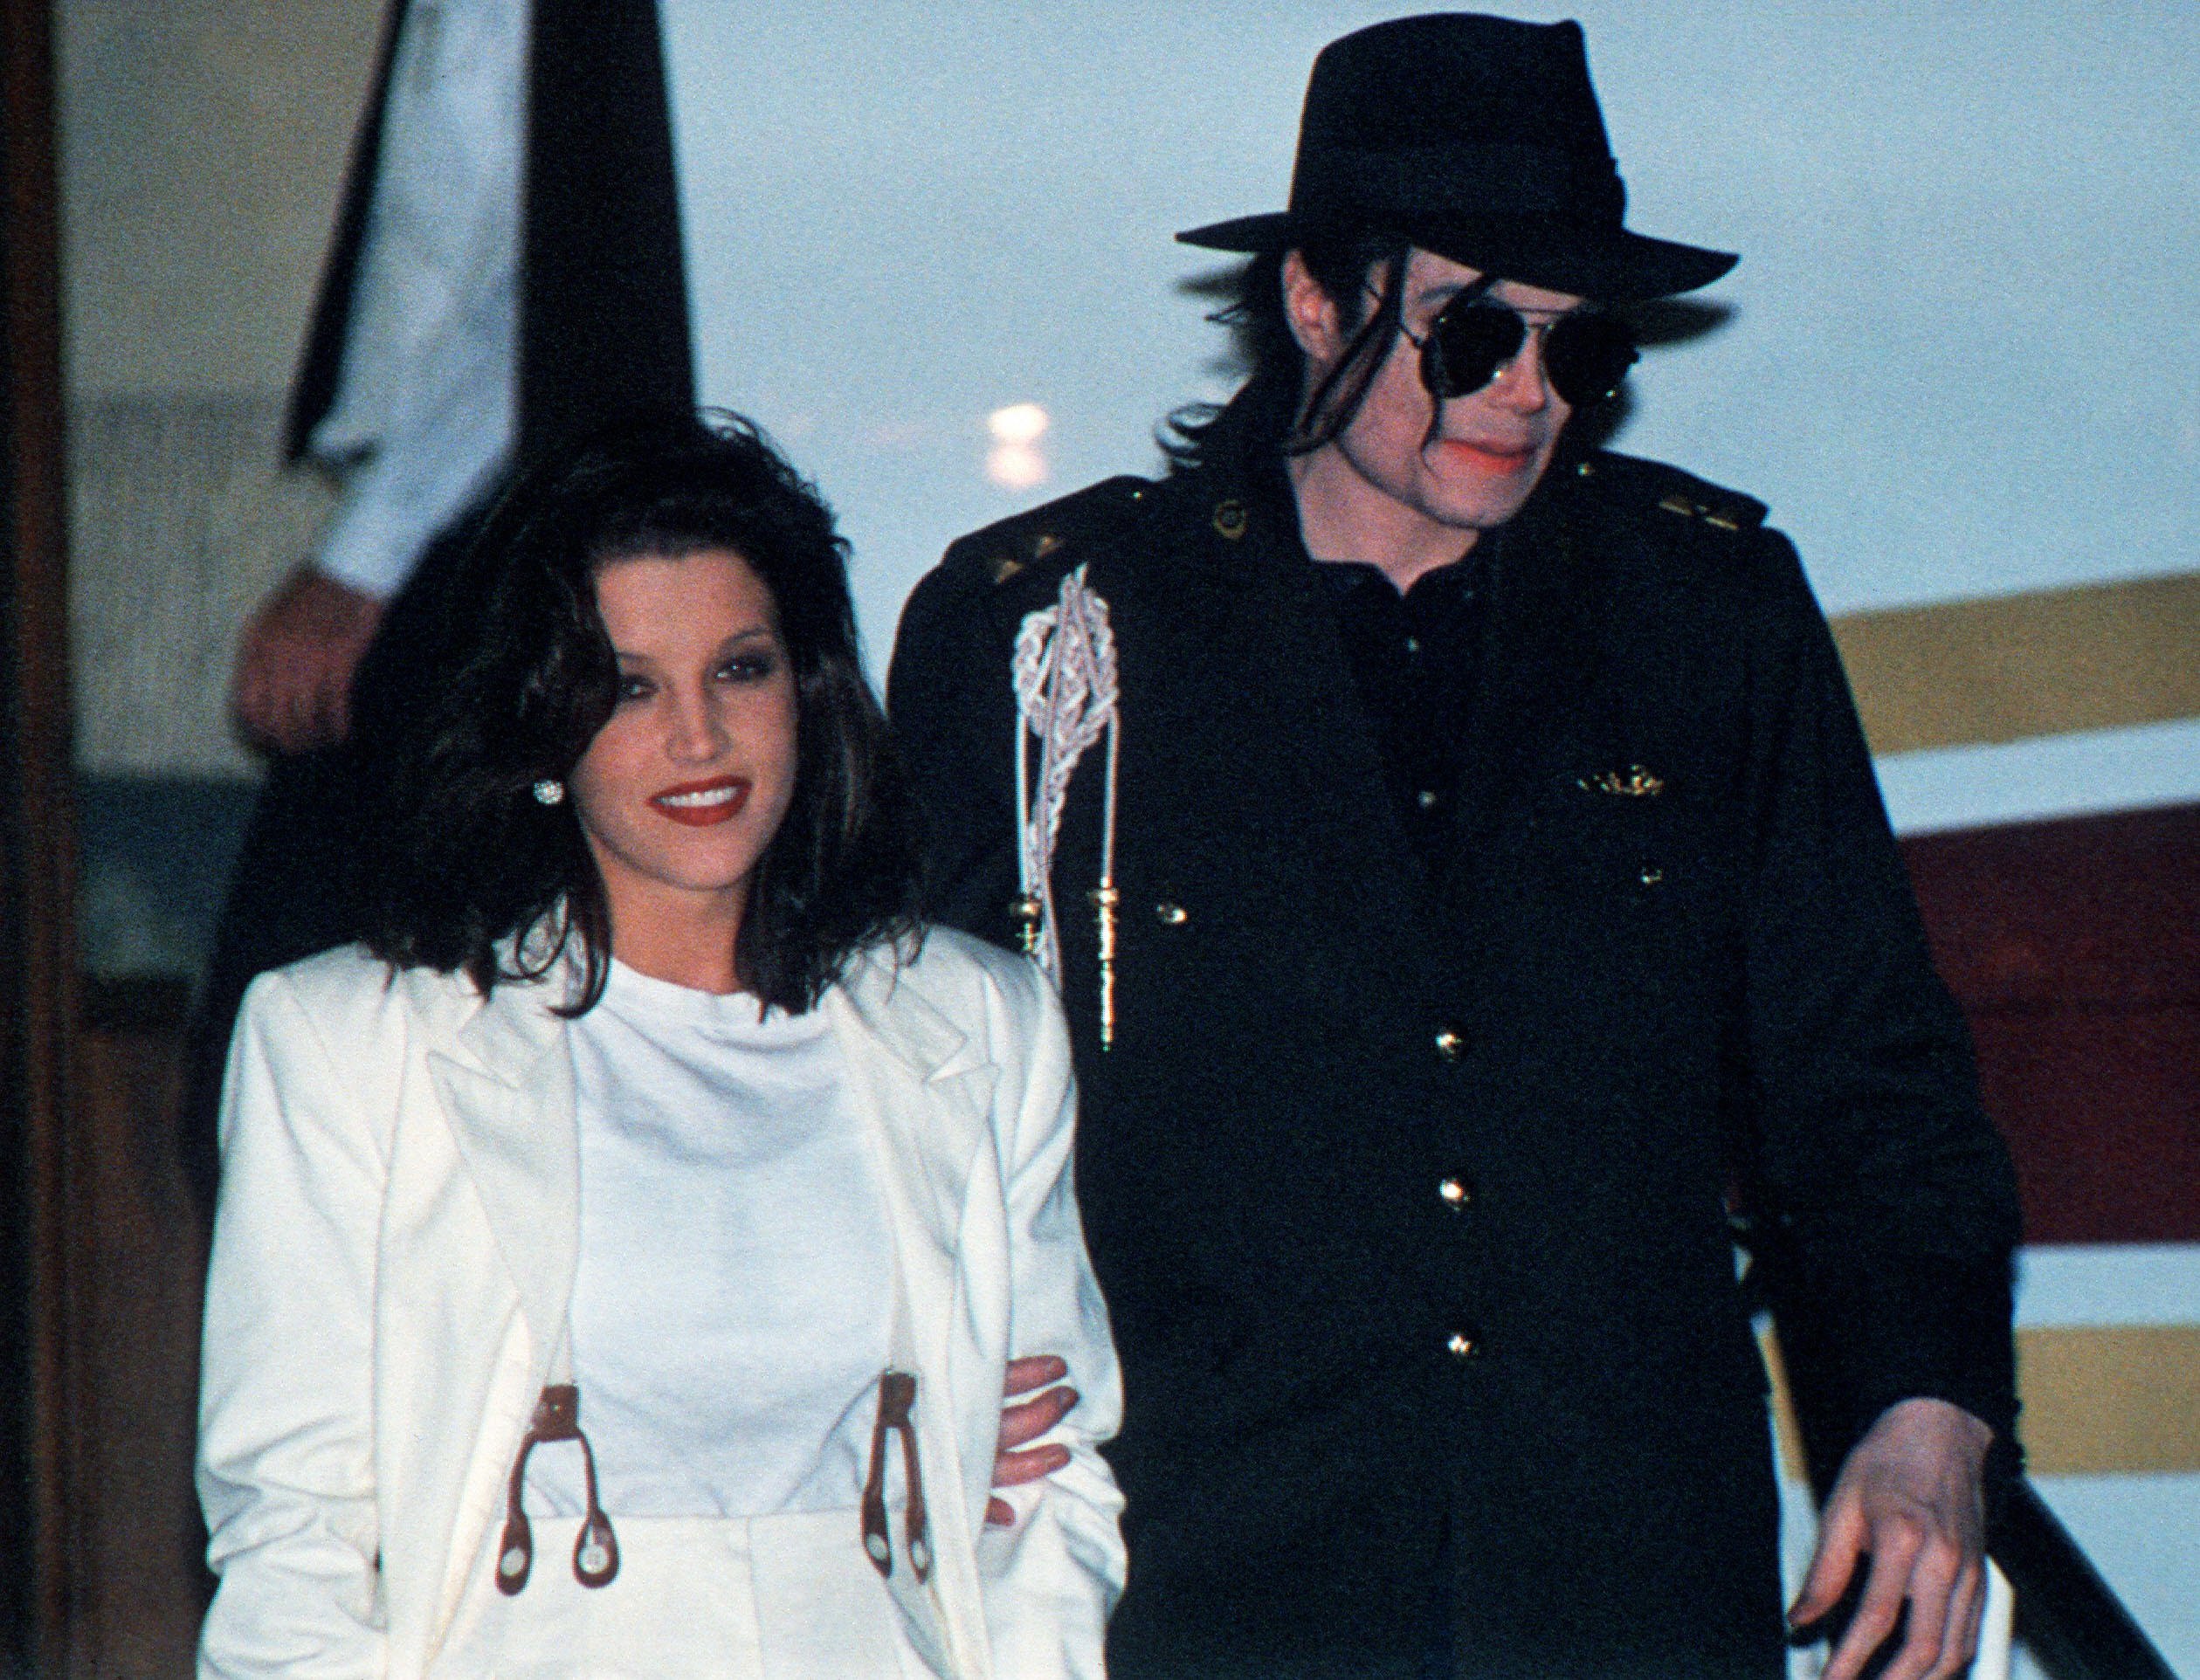 This August 16, 1994 file photo shows US pop star Michael Jackson and his then wife Lisa-Marie Presley arriving at the airport in Budapest.